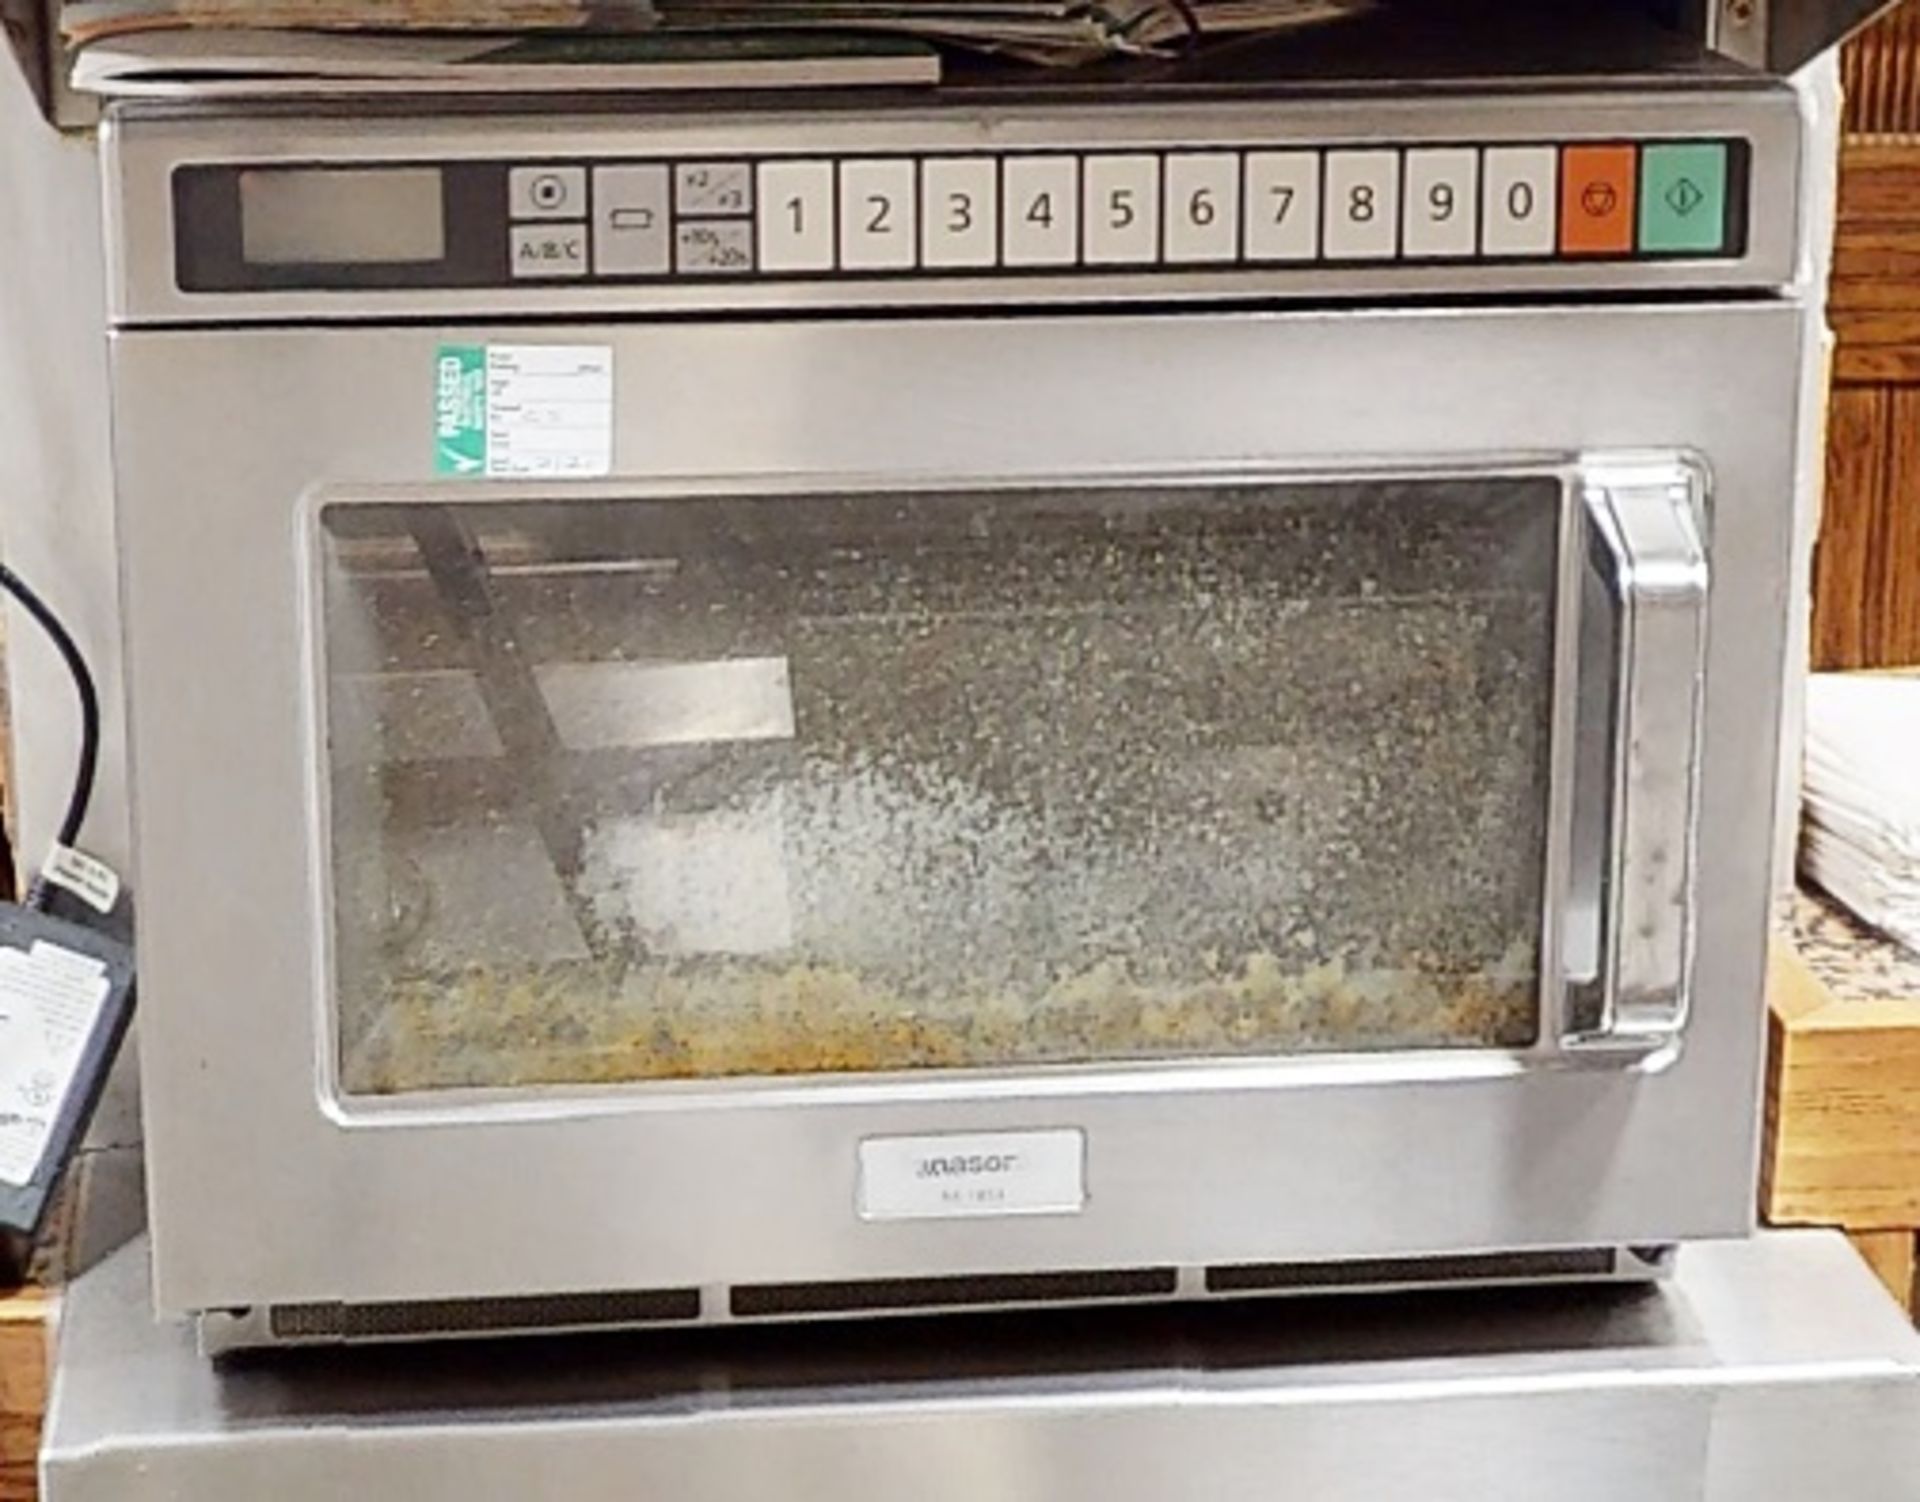 1 x Panasonic Commercial Microwave Oven Featuring A Stainless Steel Exterior And 'Microsave'